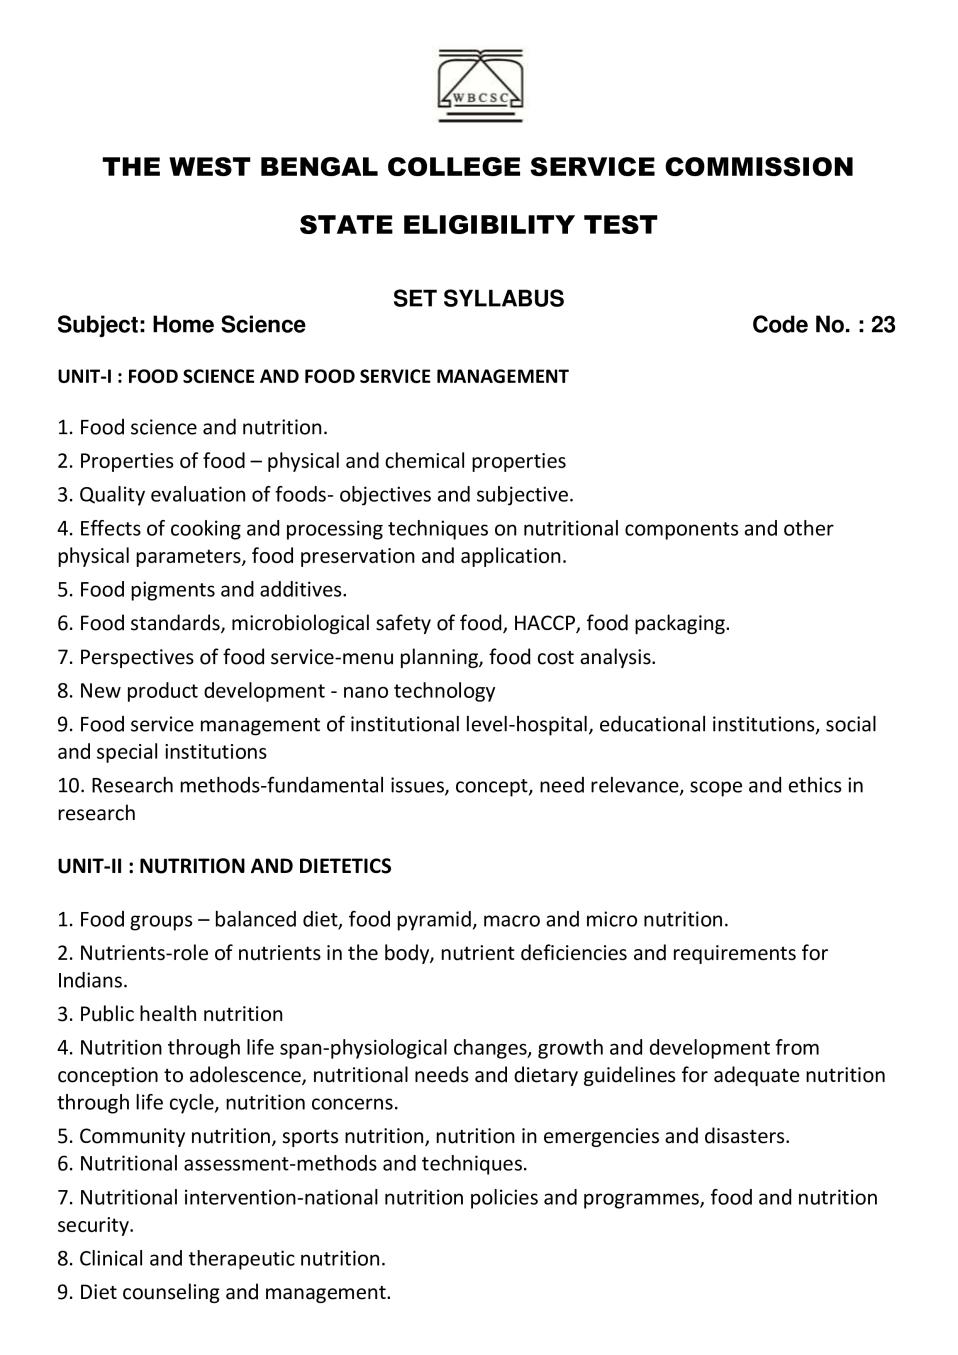 WB SET Syllabus for Home Science - Page 1